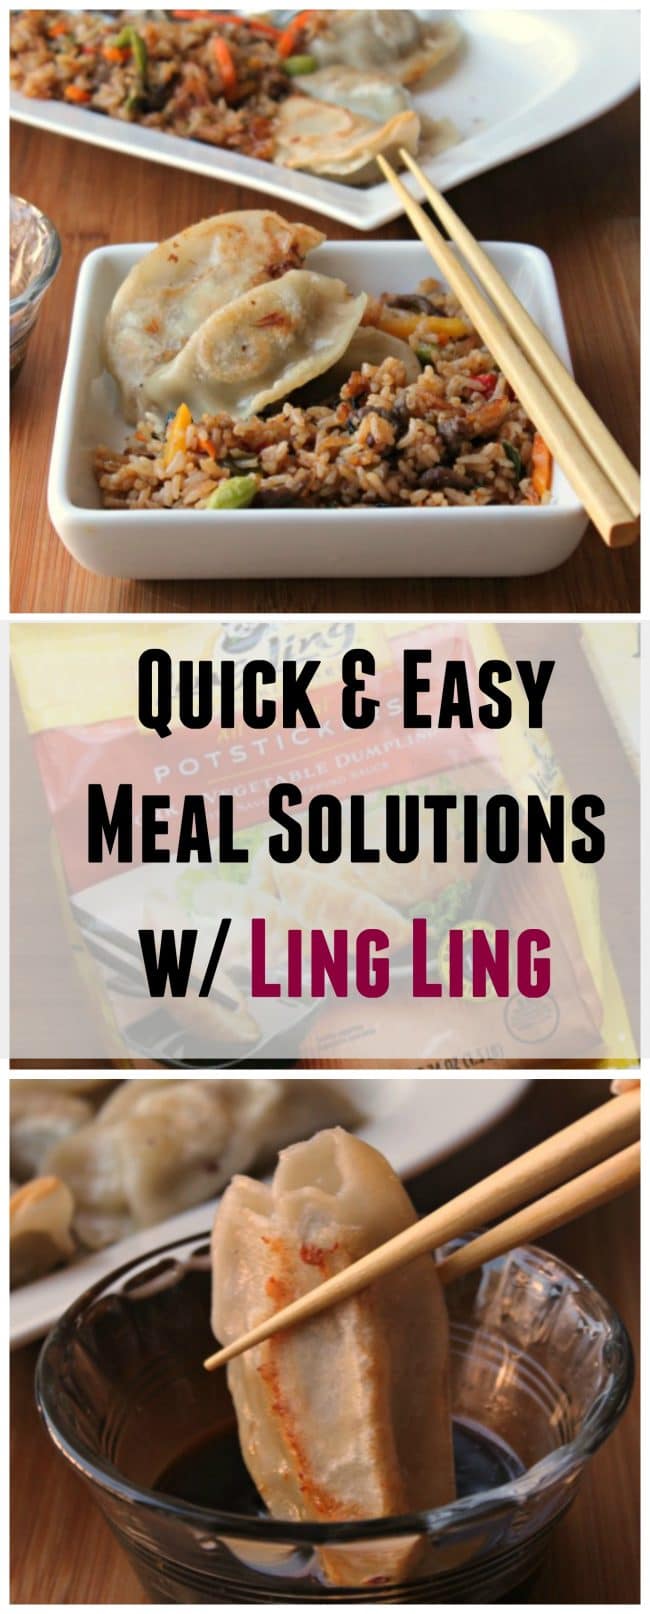 Quick & Easy Meal Solutions with Ling Ling